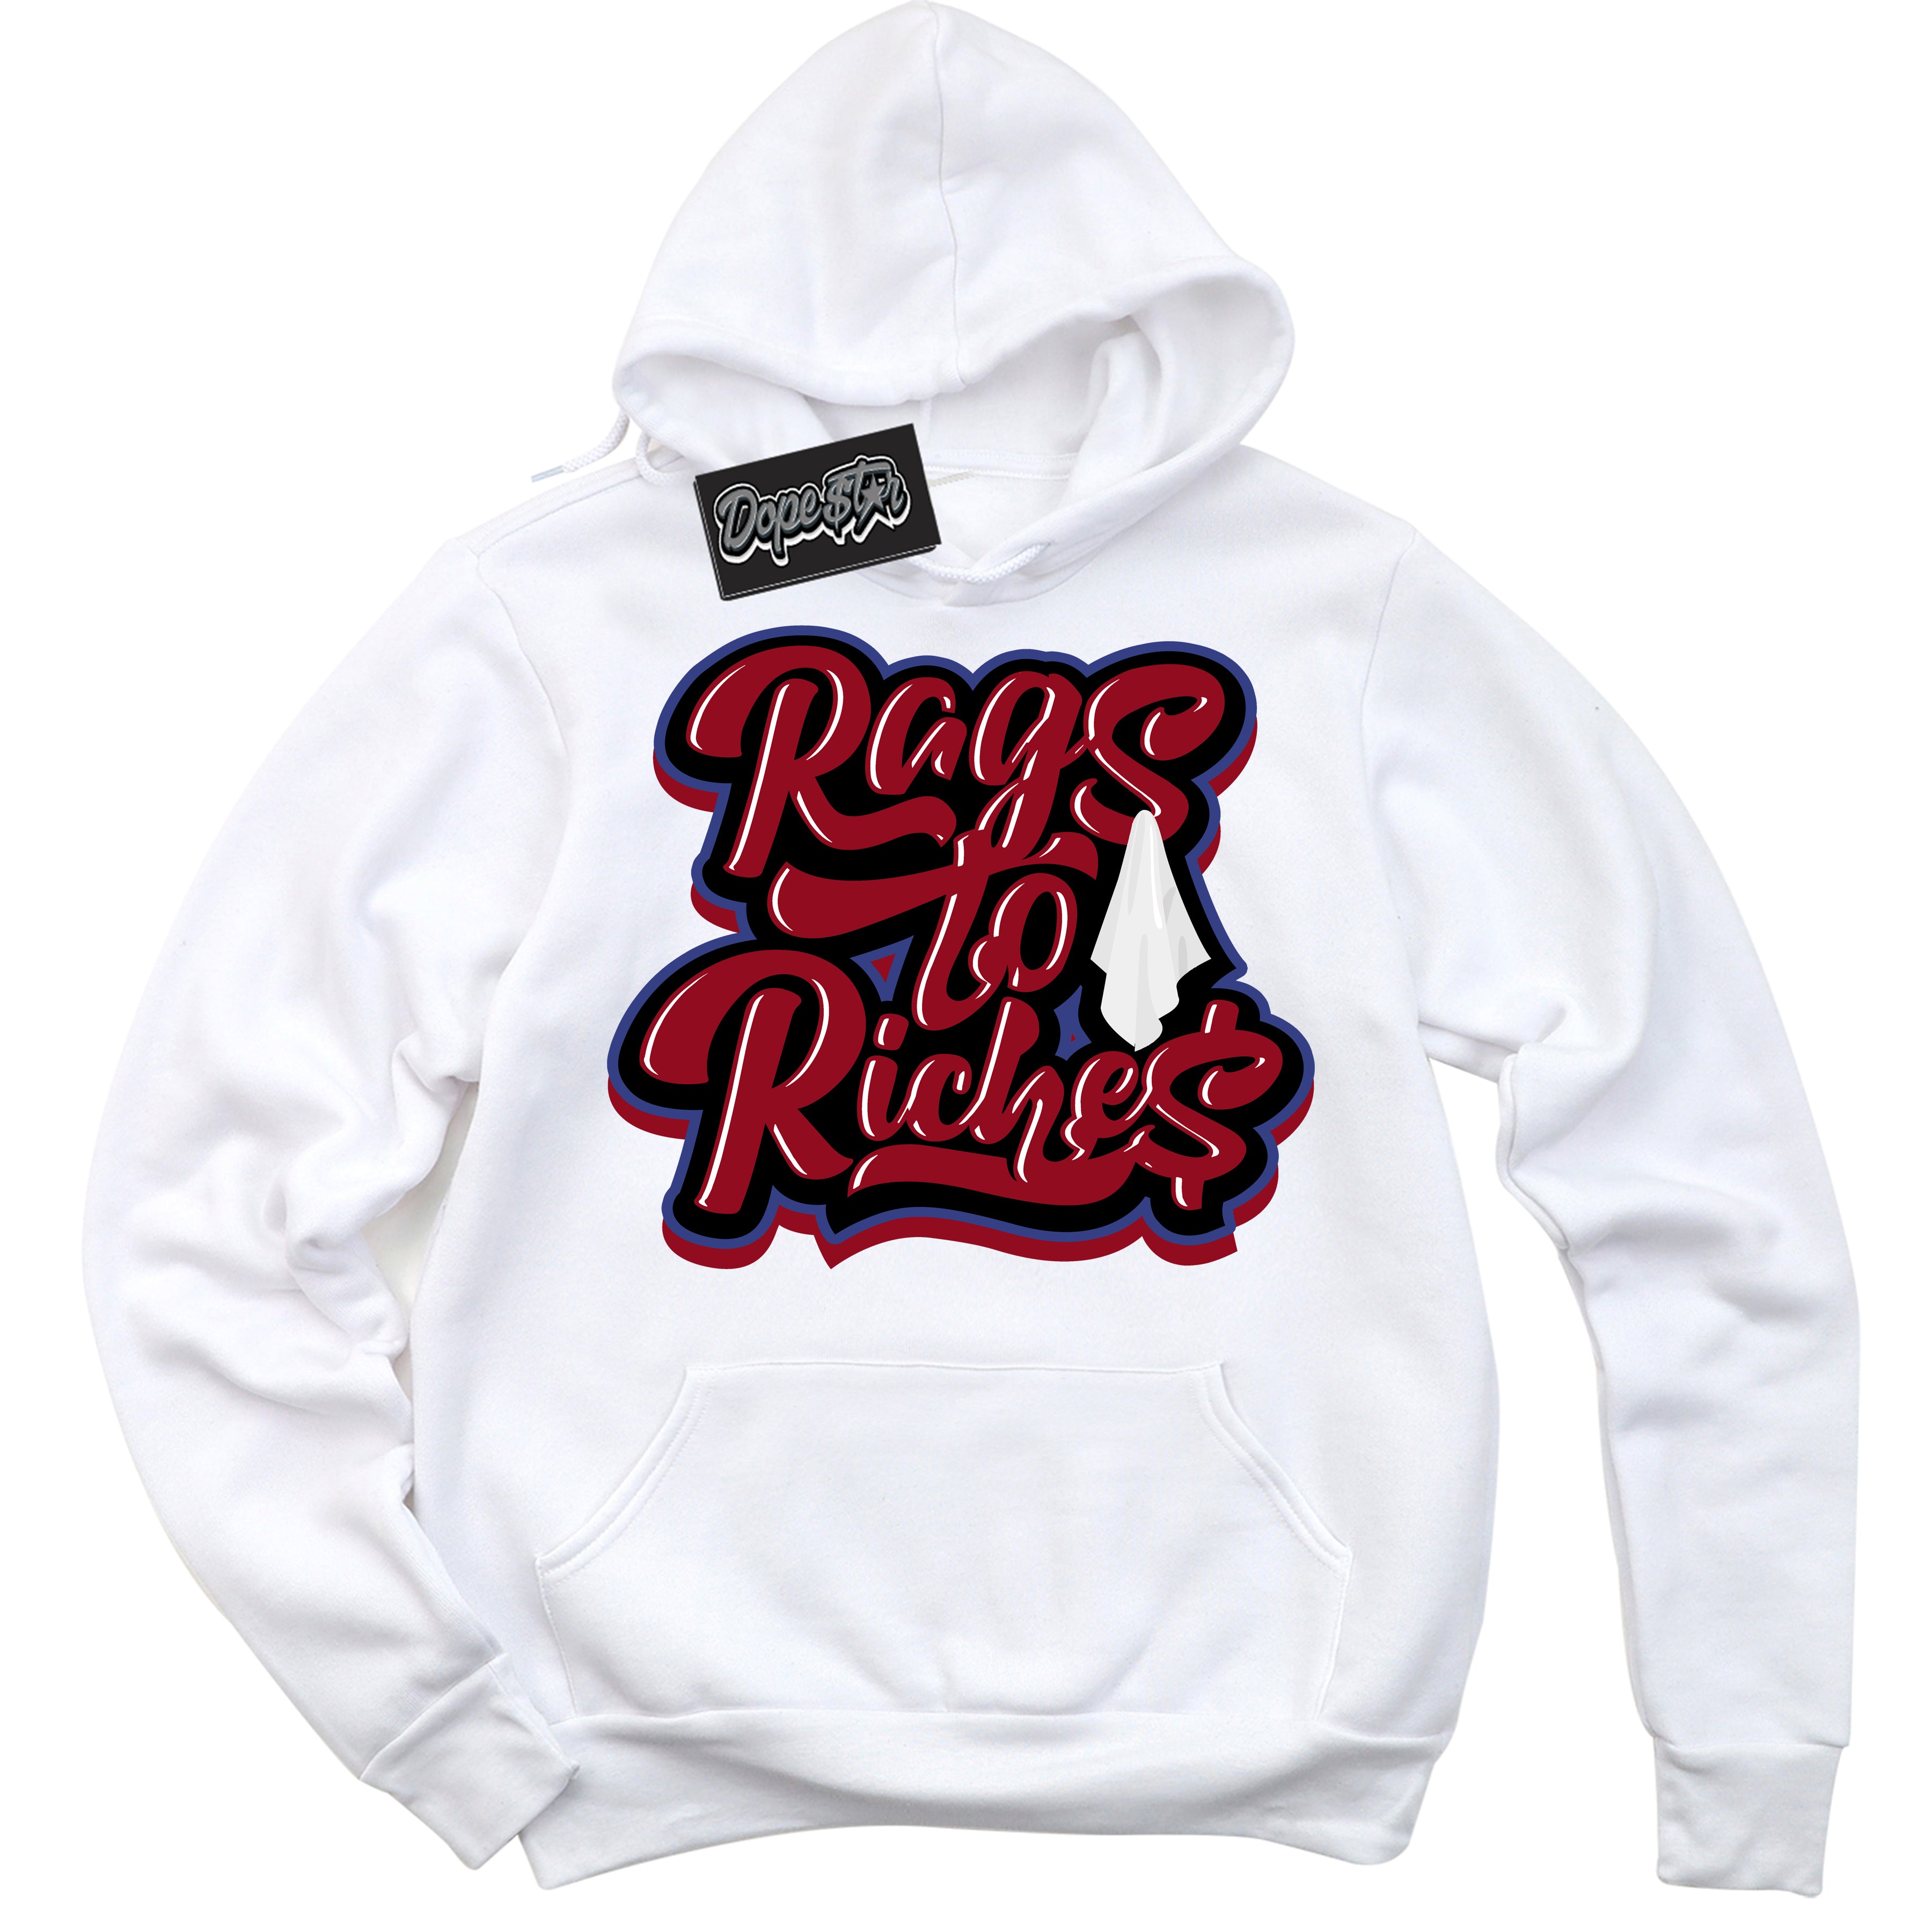 Cool White Hoodie with “ Rags To Riches ”  design that Perfectly Matches Playoffs 8s Sneakers.